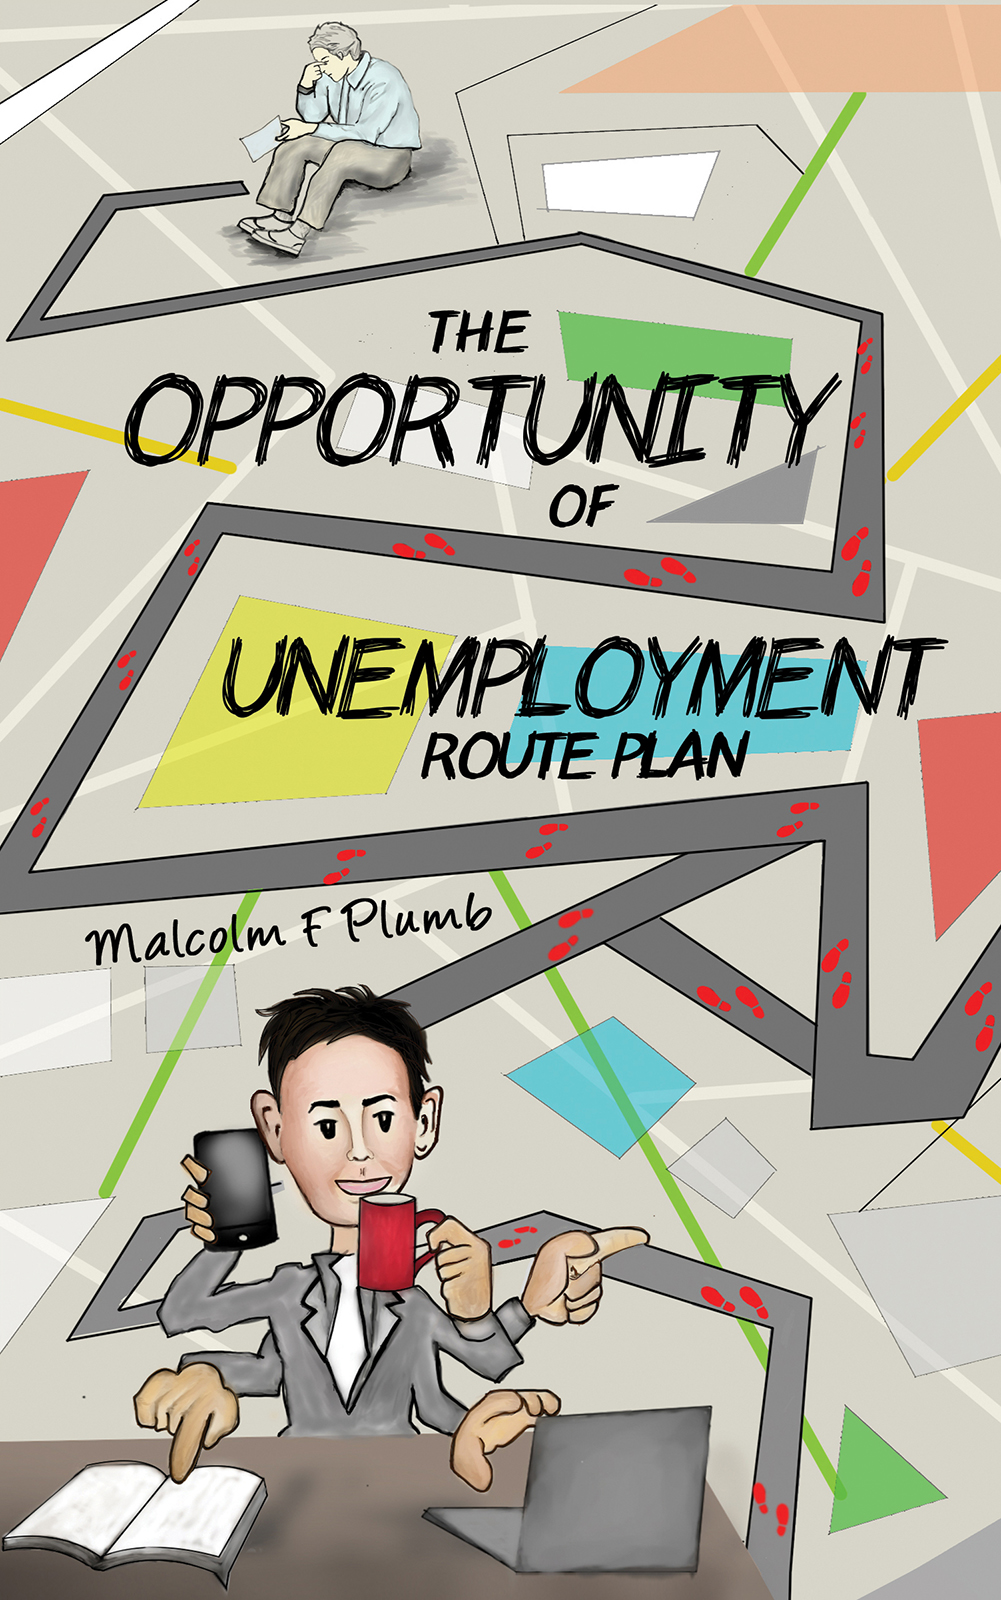 This image is the cover for the book The Opportunity of Unemployment